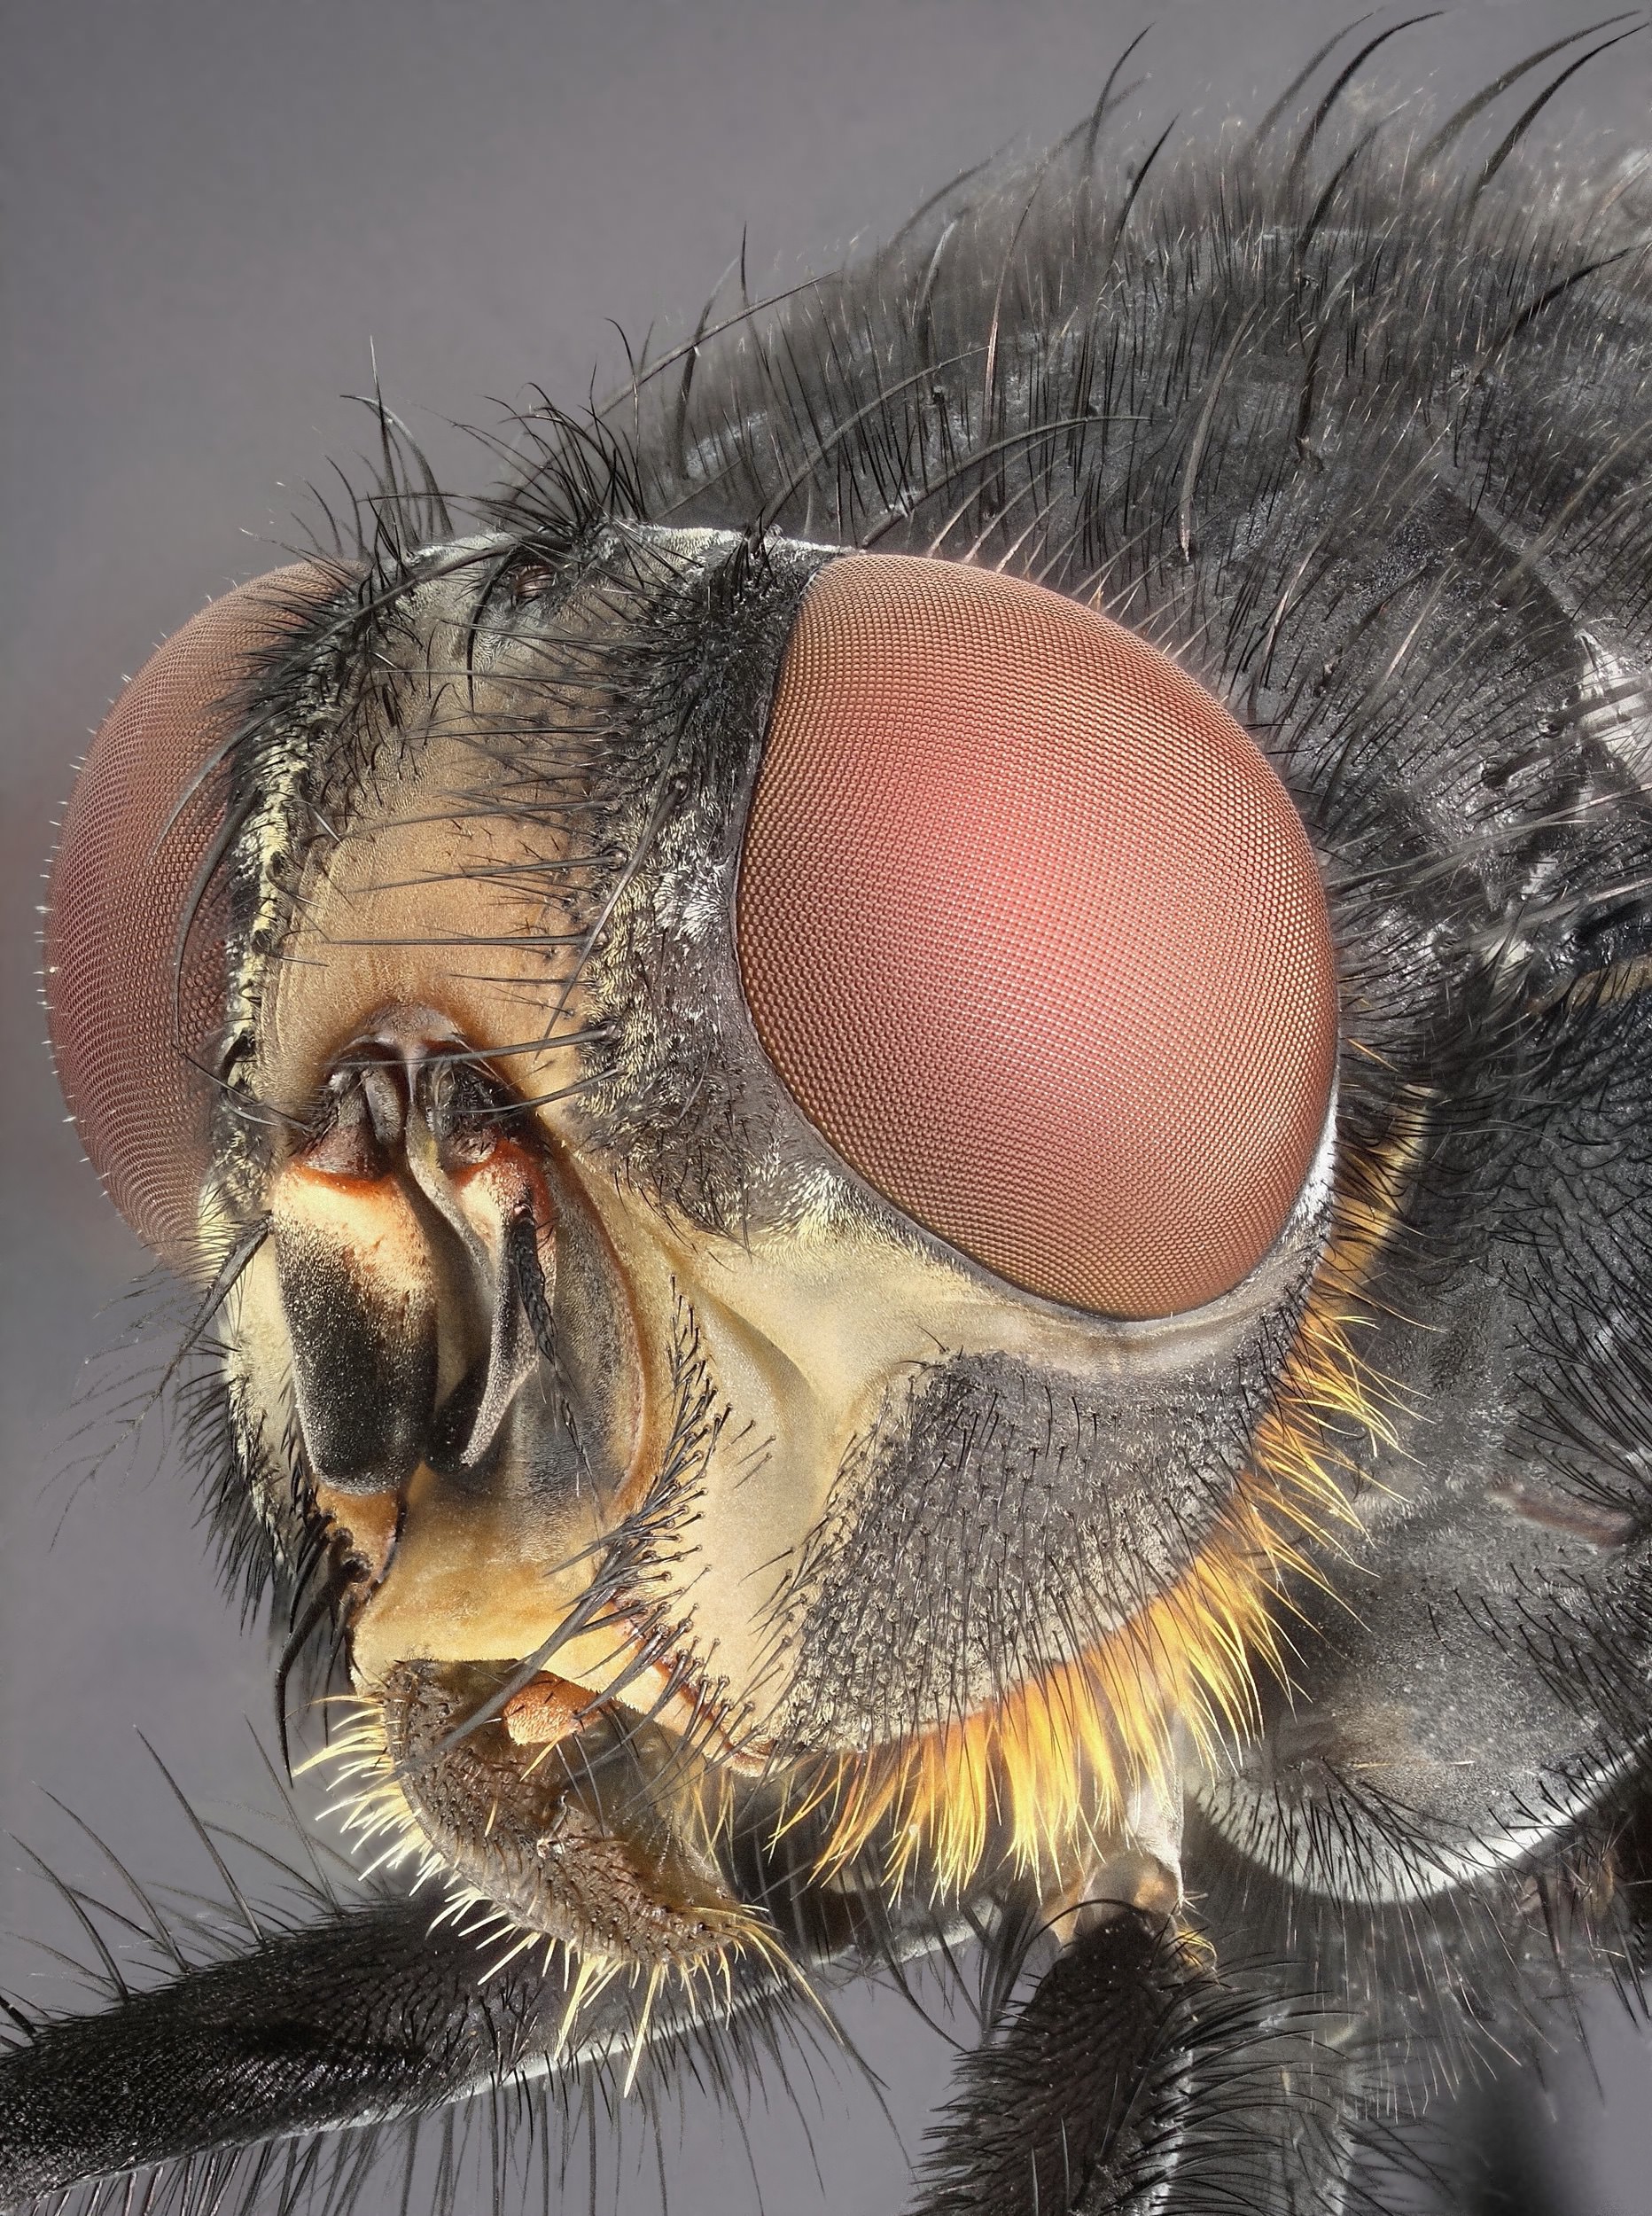 Extreme close-up of the head of a bluebottle fly (Calliphora vomitoria). This photograph is composed of a focus-stack of 250 images